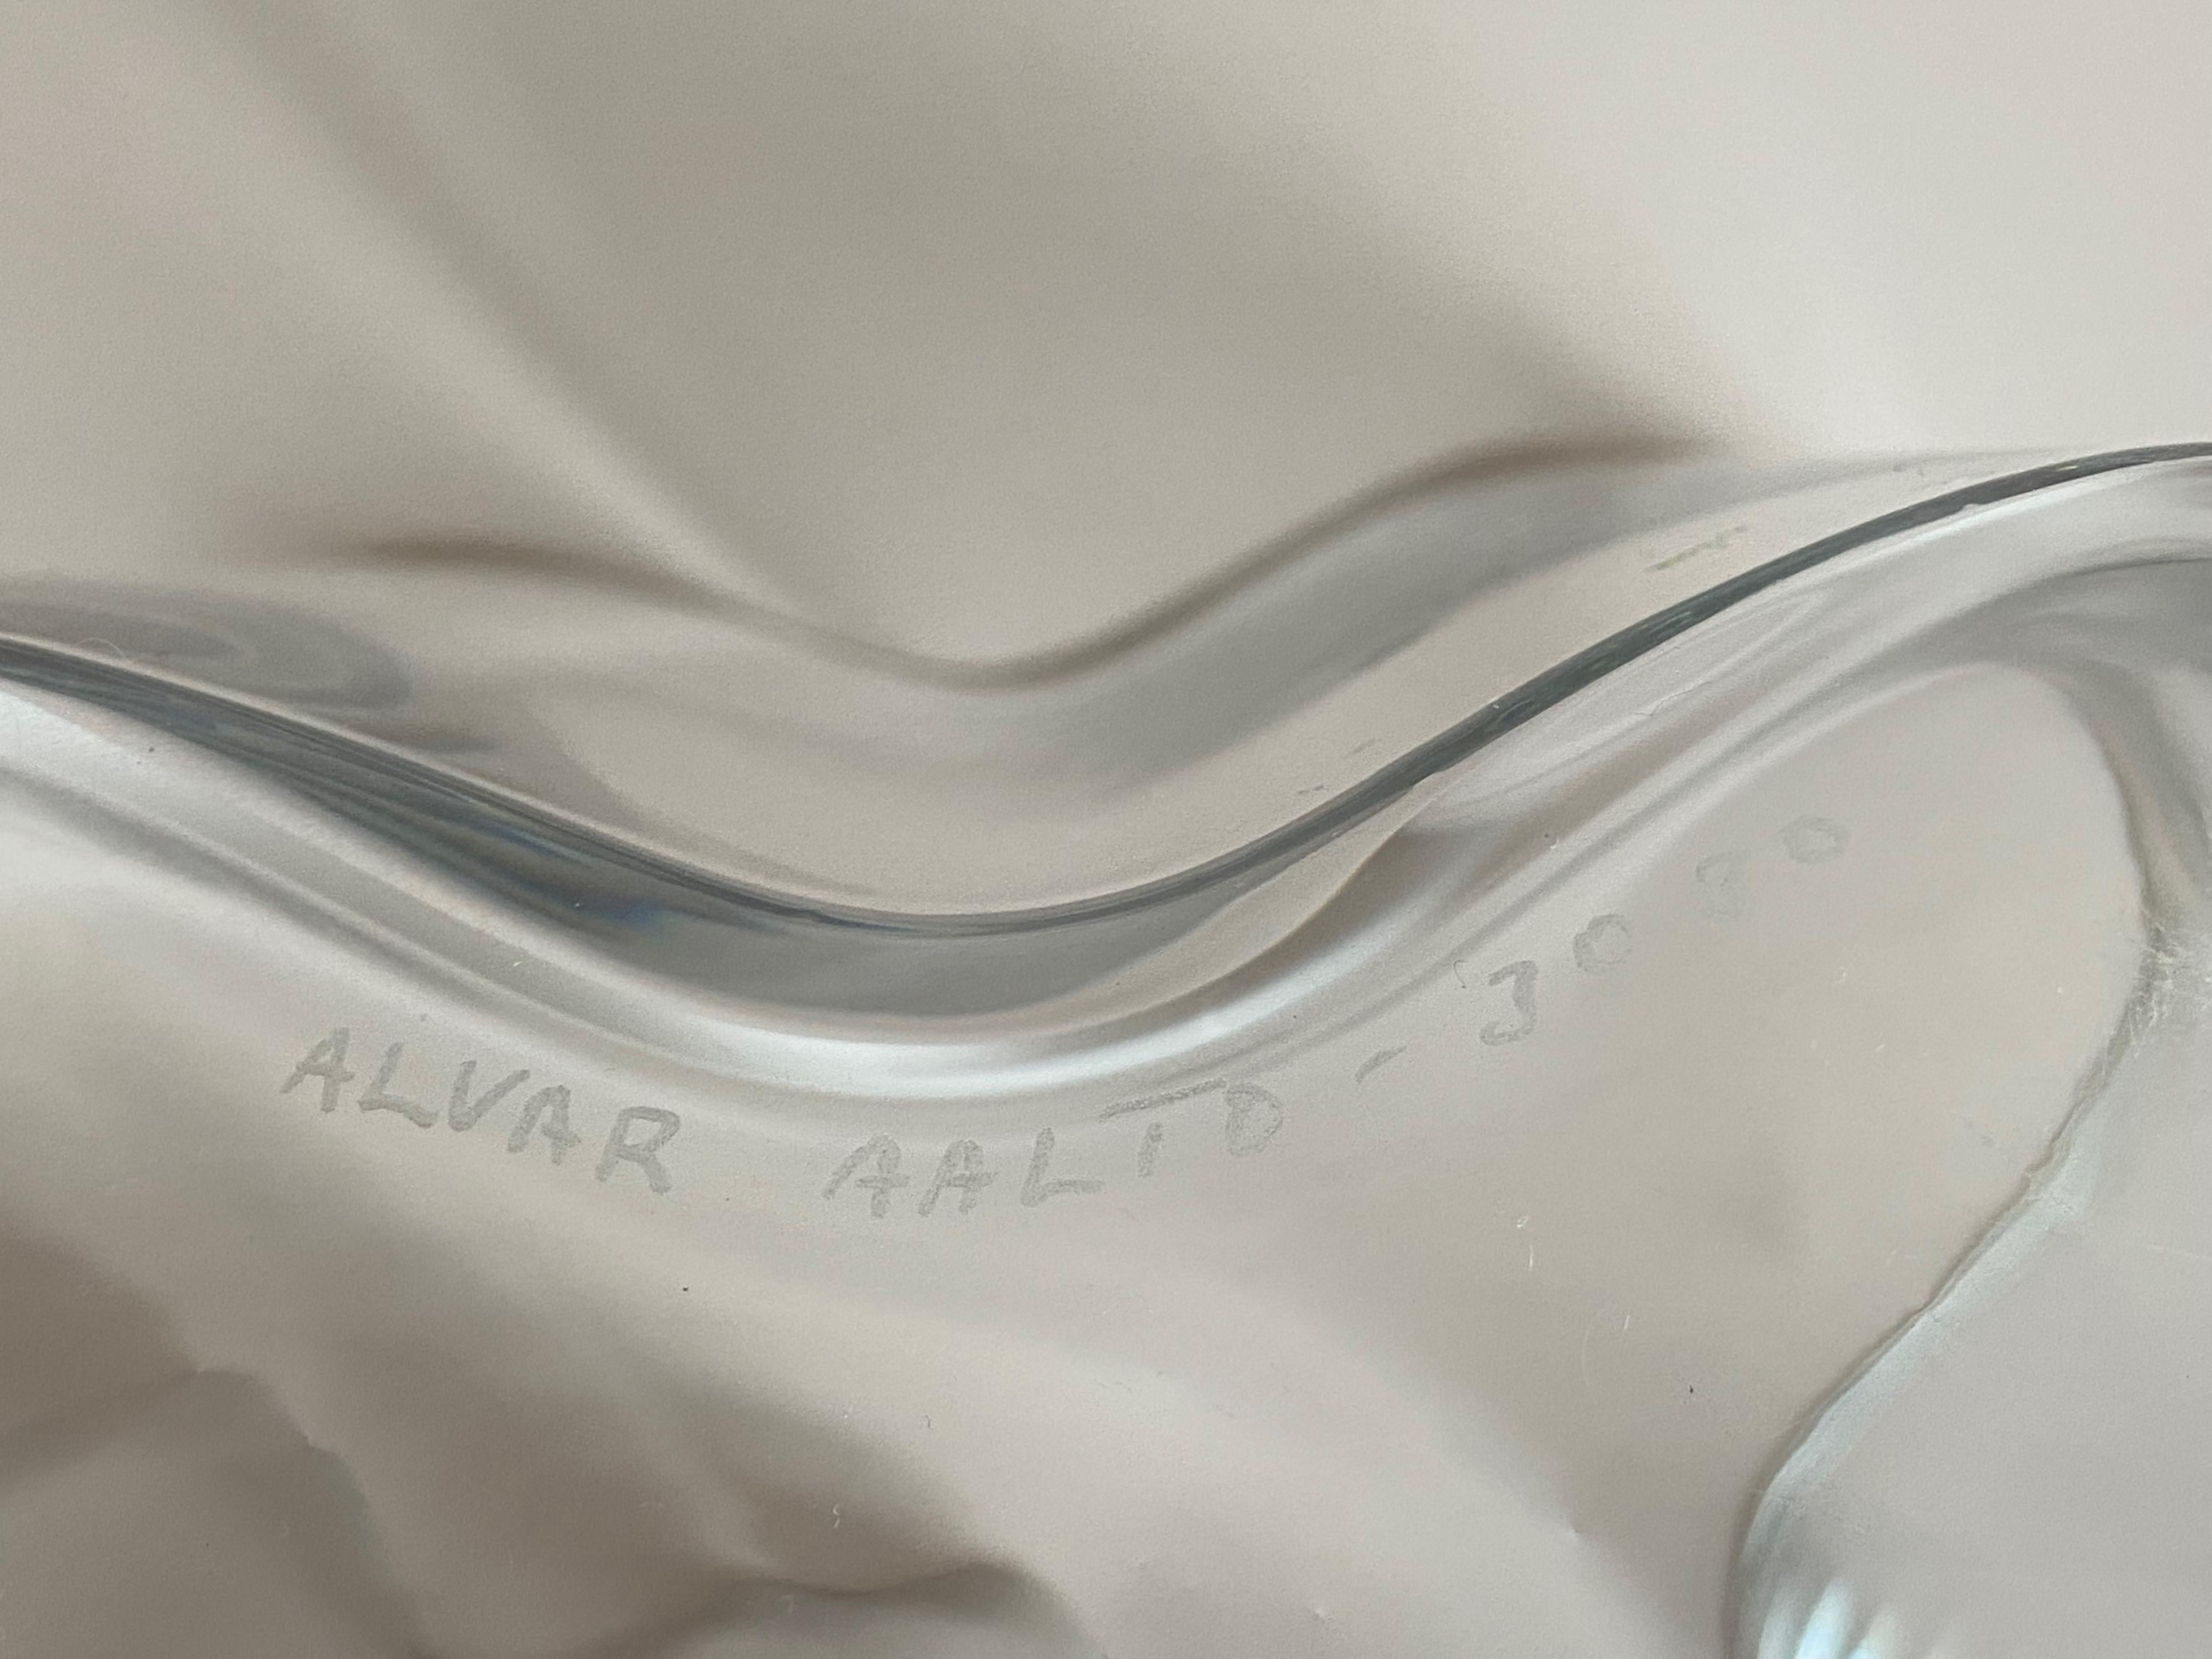 Hand signed Alvar Aalto vase 3030 Savoy for Iittala made in Finland. Nice vintage condition with some scratches at the base and one Fleabite.